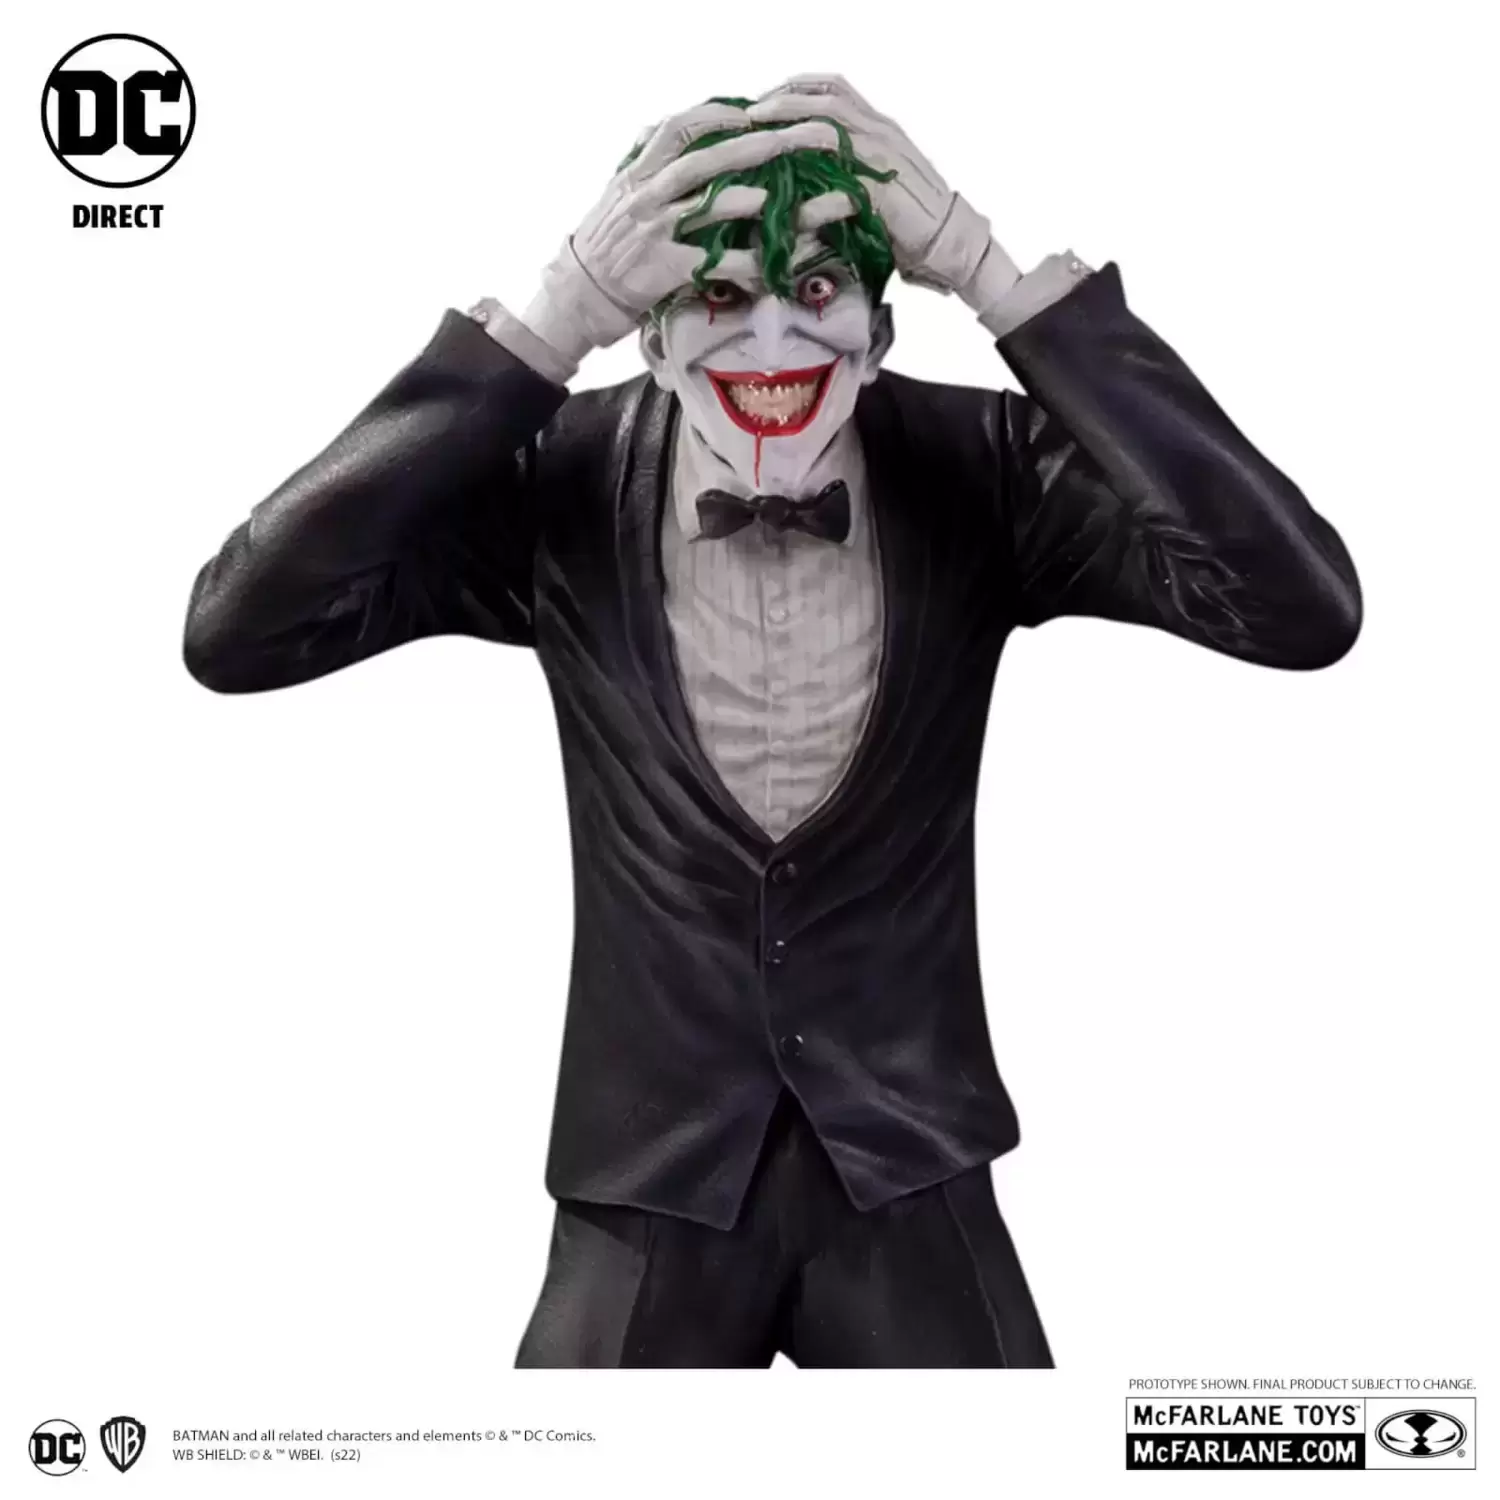 DC Collectibles Statues - The Joker: Purple Craze by Brian Bolland - DC Direct